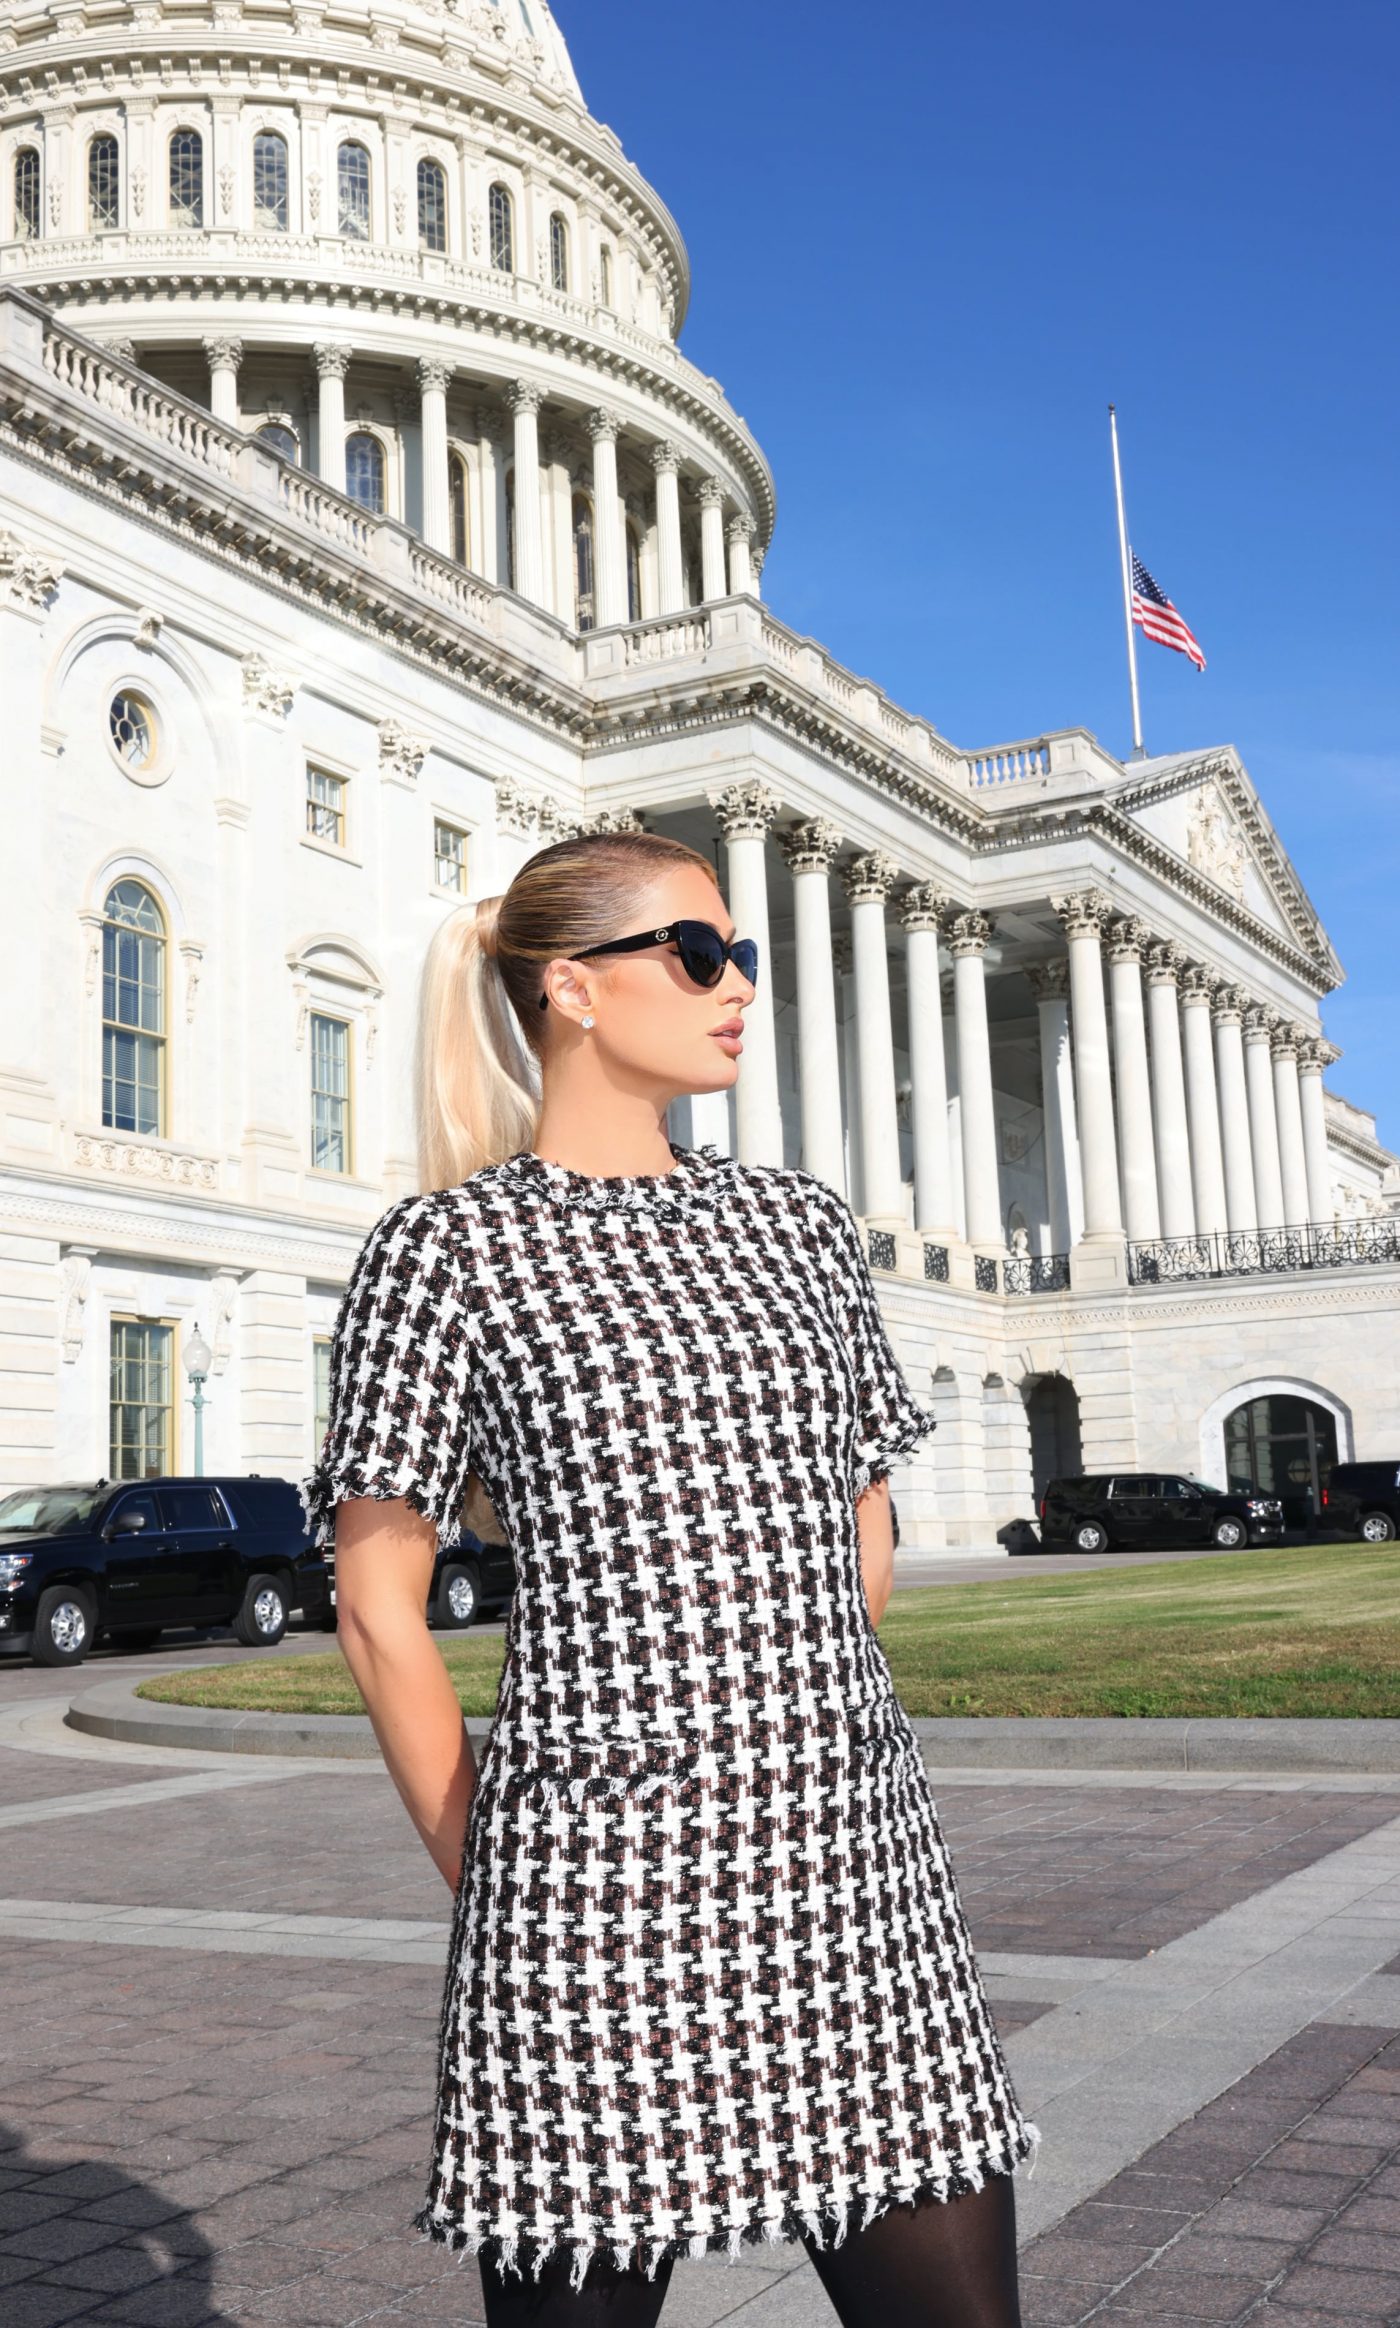 Paris Hilton Goes to Washington to Help End Child Abuse in Congregate Care